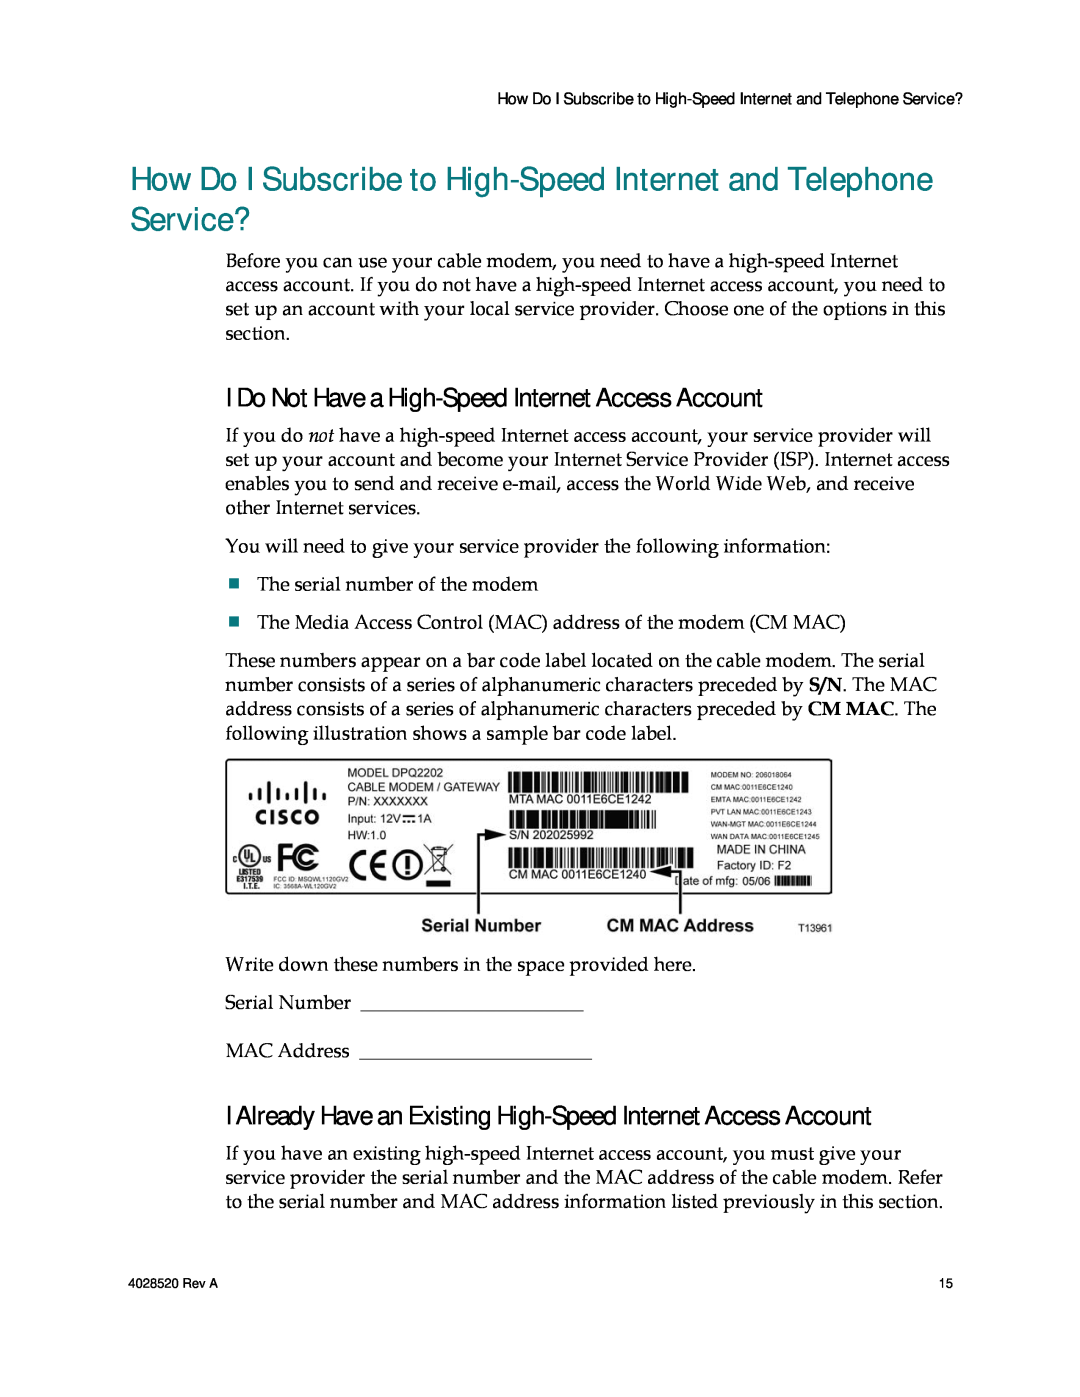 Cisco Systems DPQ2202 important safety instructions How Do I Subscribe to High-Speed Internet and Telephone Service? 